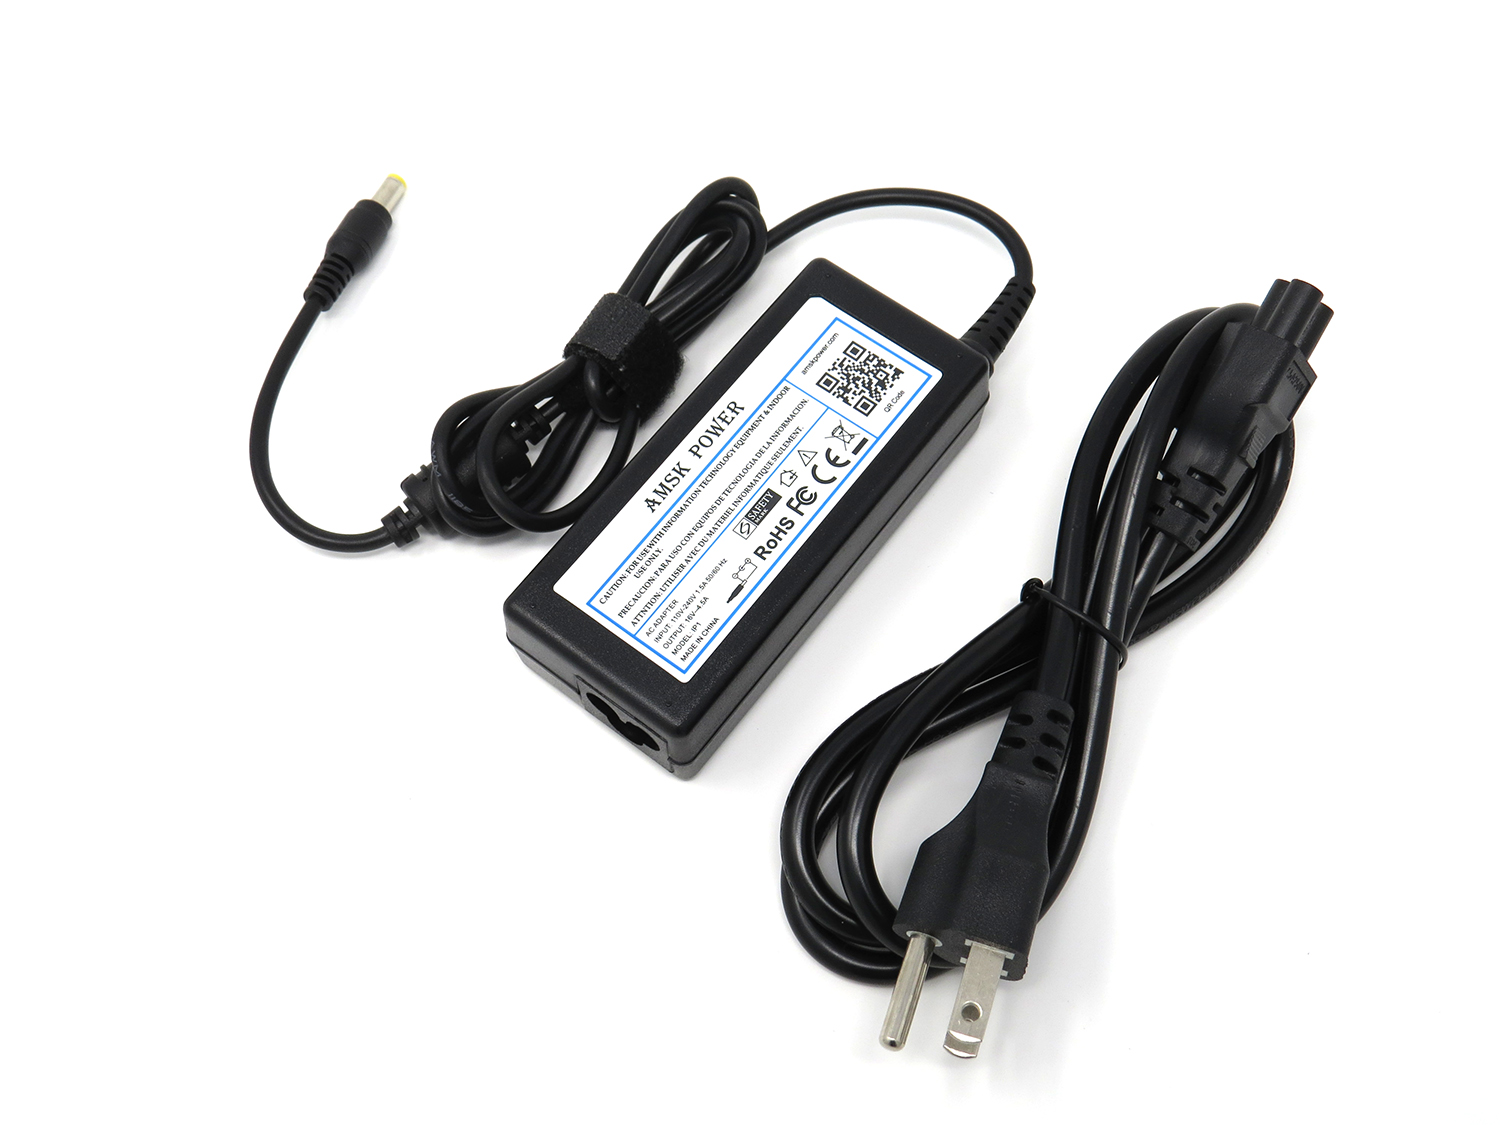 AC Adapter Charger for Panasonic Toughbook Cf-18 Cf-19 Cf-p1 Cf-r1 - image 1 of 3